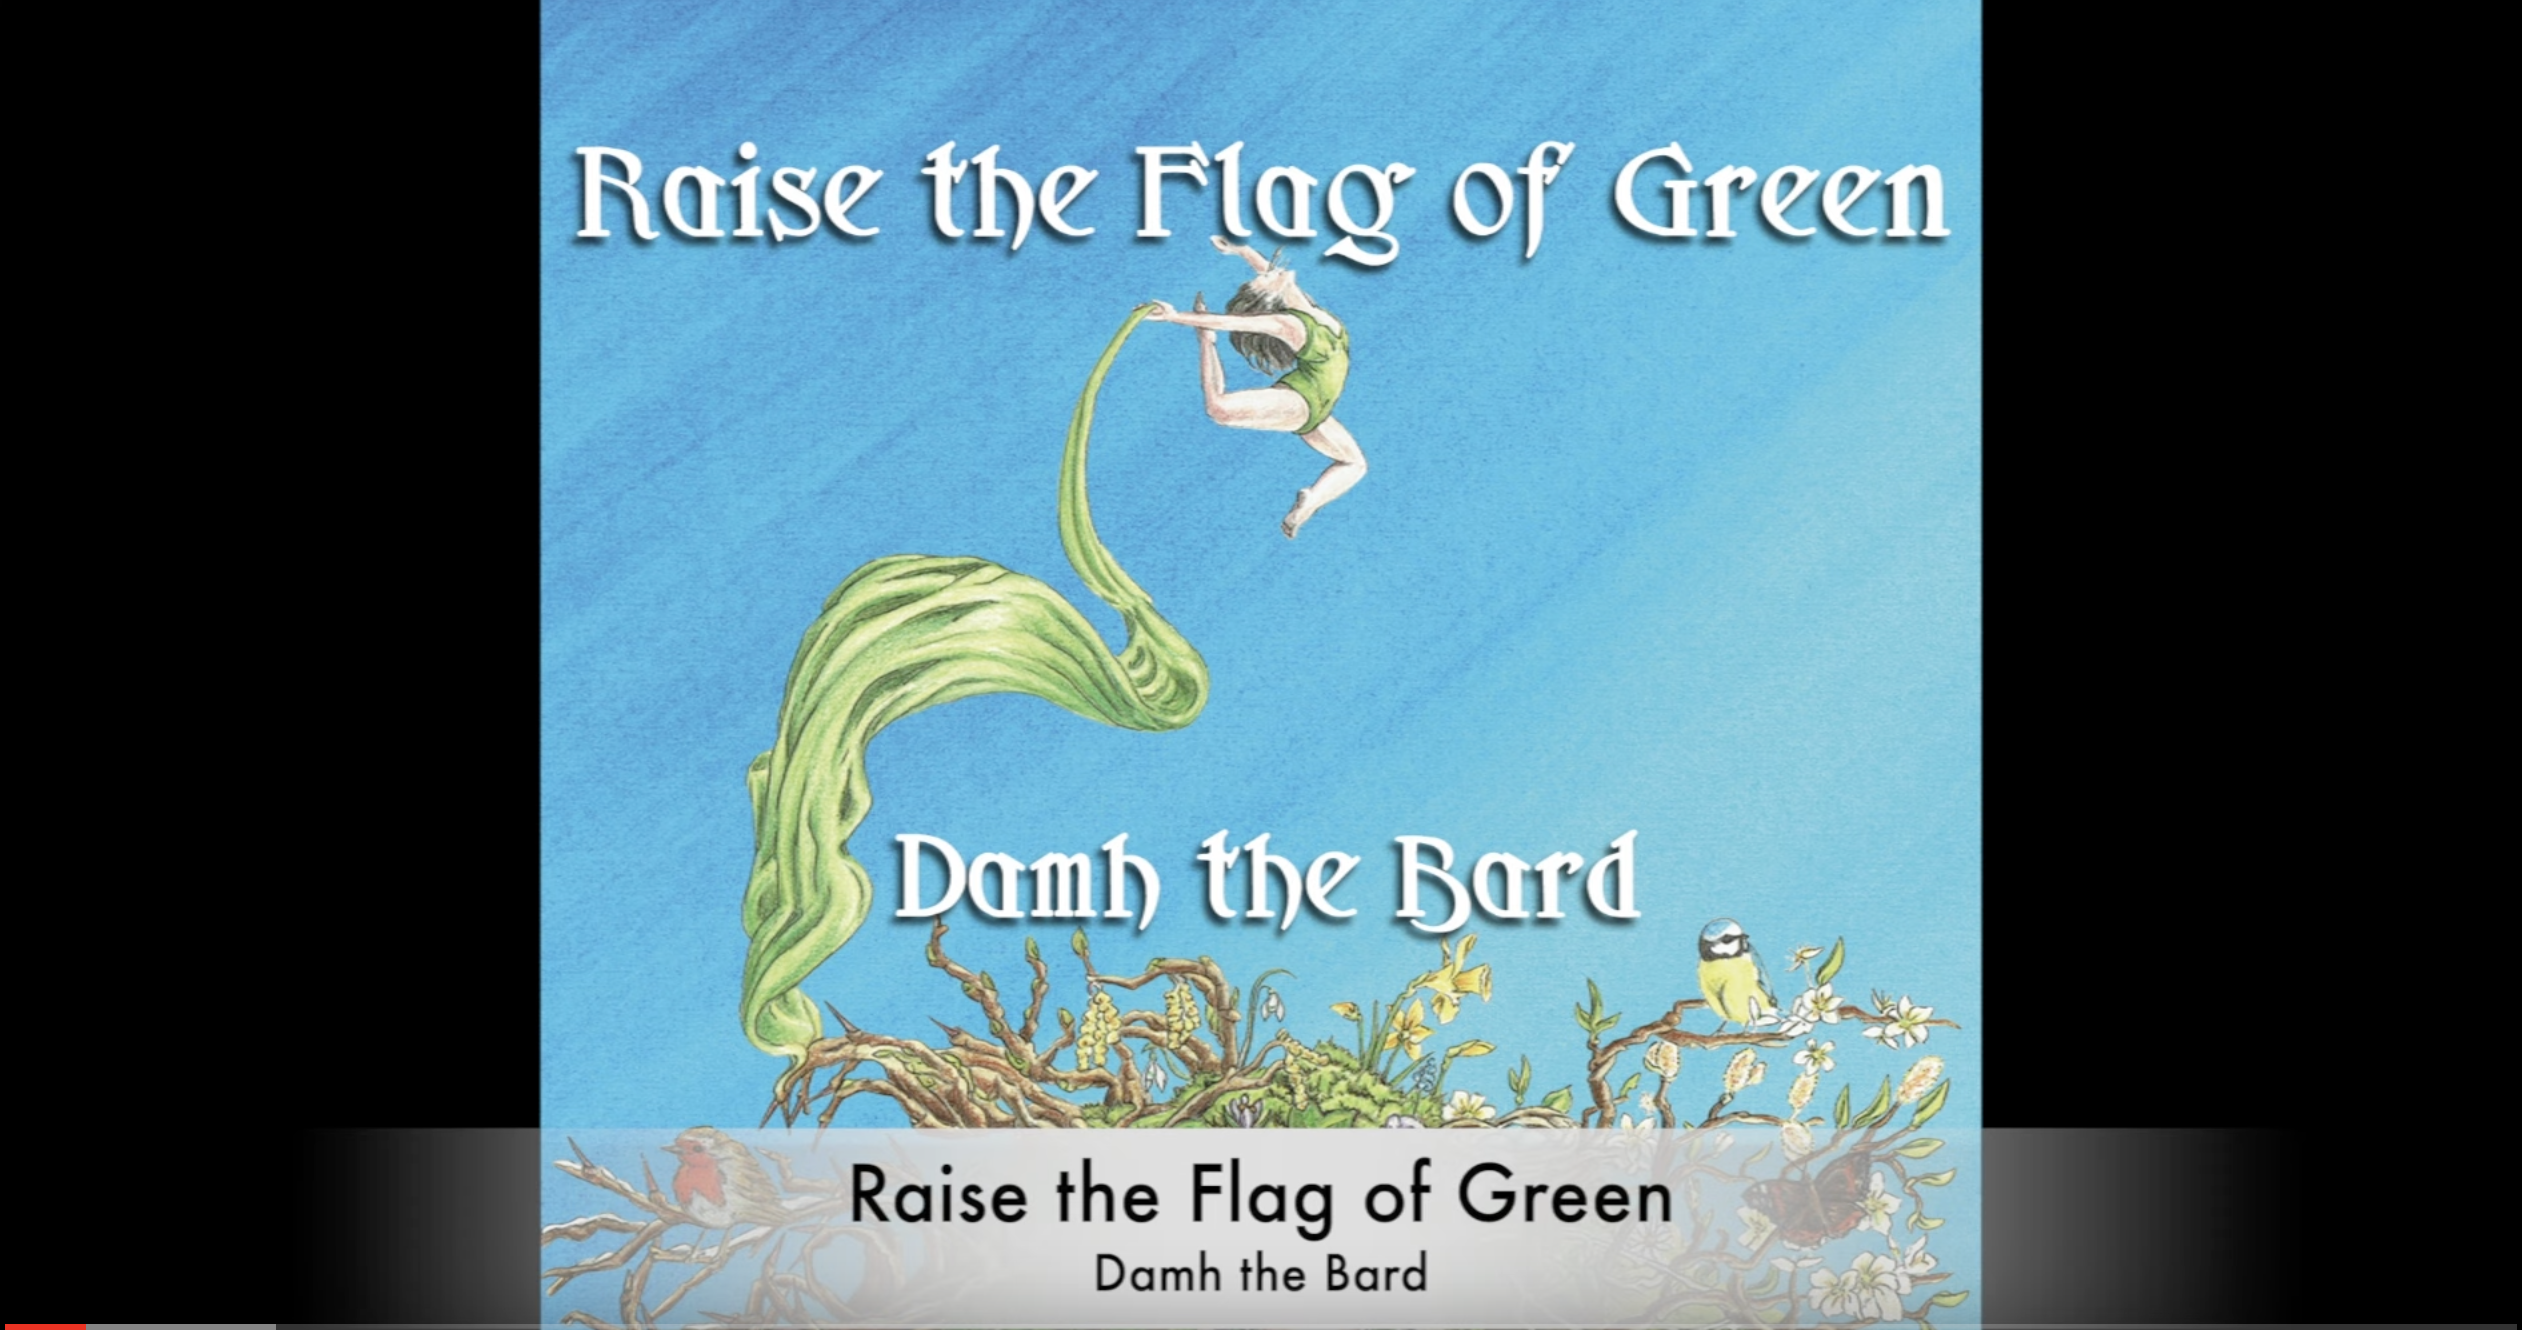 The Making of Raise the Flag of Green – Raise the Flag of Green